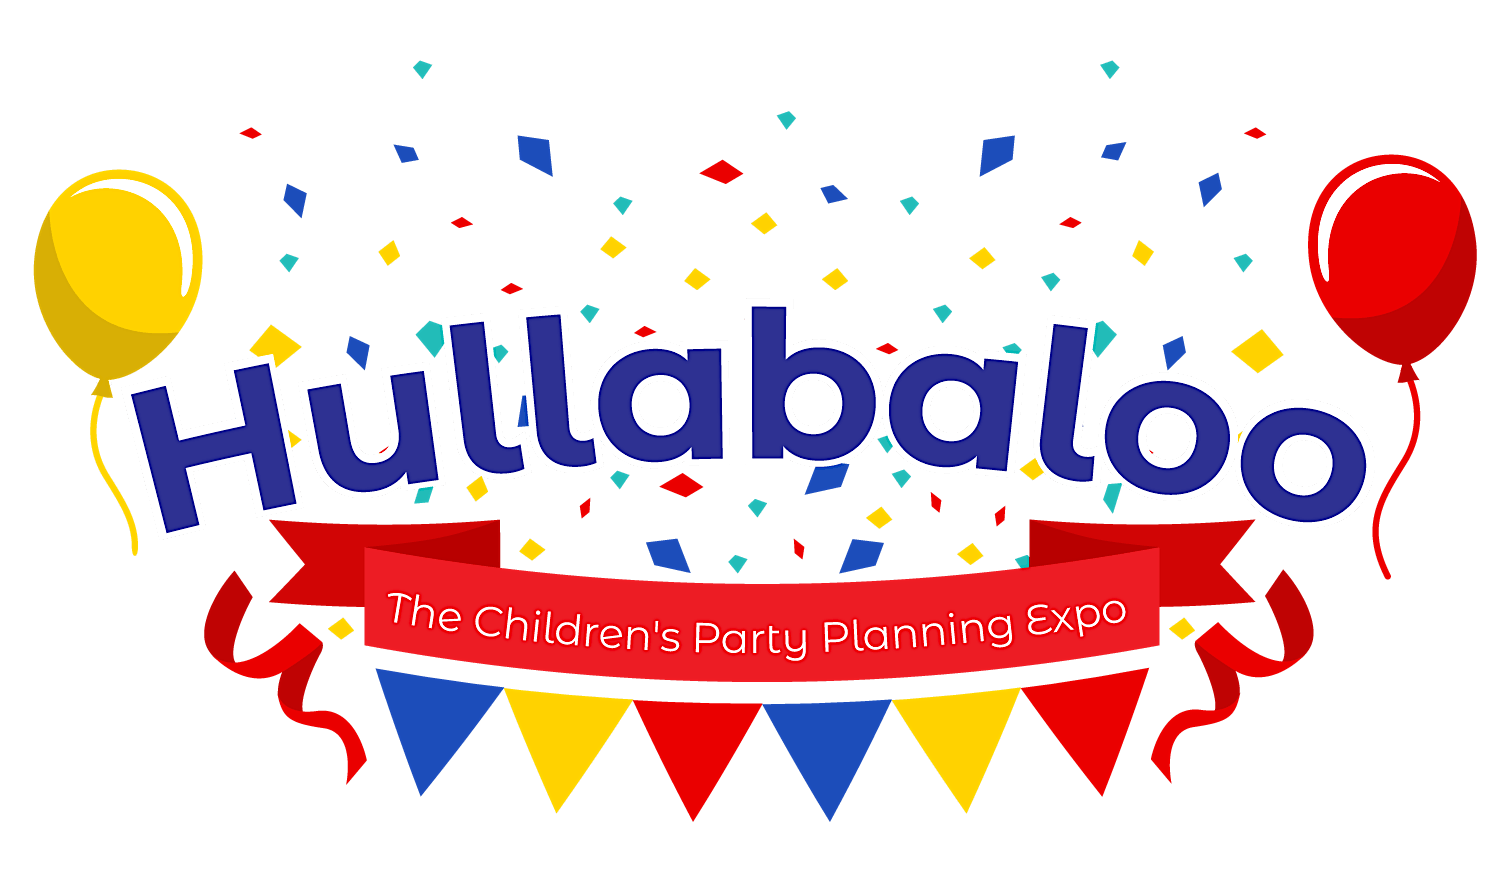 Hullabaloo - The Children's Party Planning Expo!